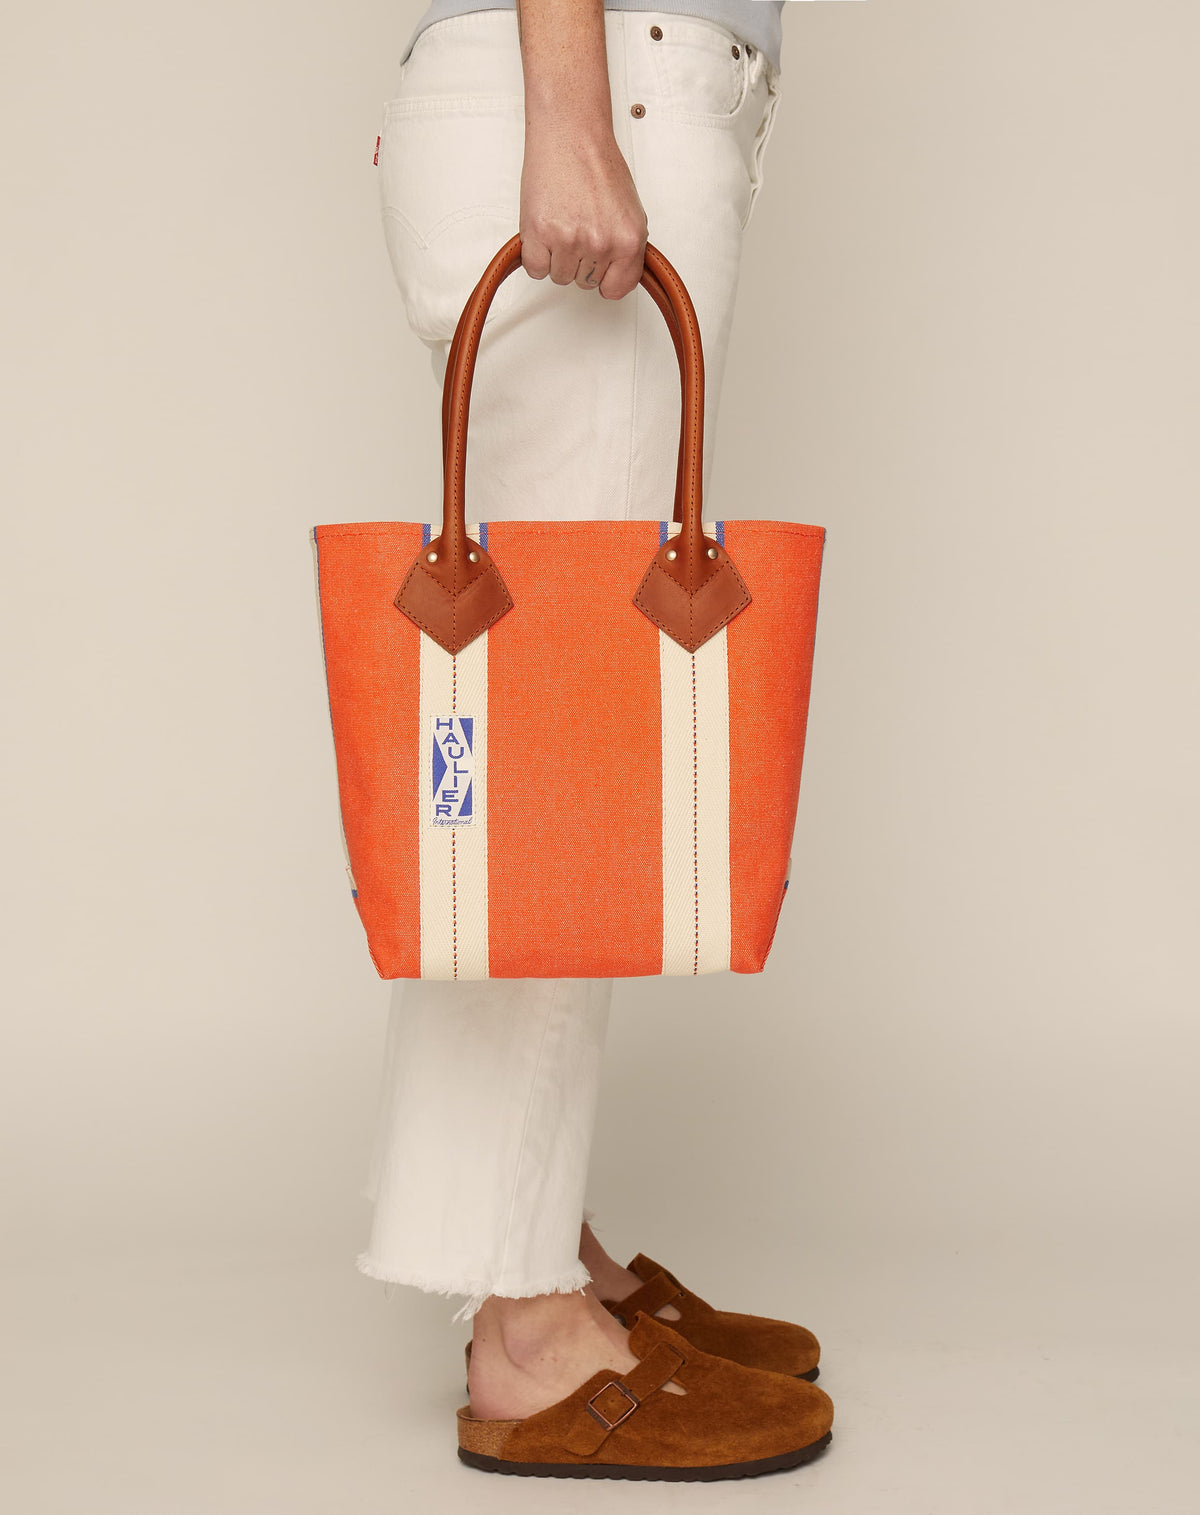 Image of person in white jeans and tan slides holding a small classic canvas tote bag in orange colour with tan leather handles and contrasting stripes.